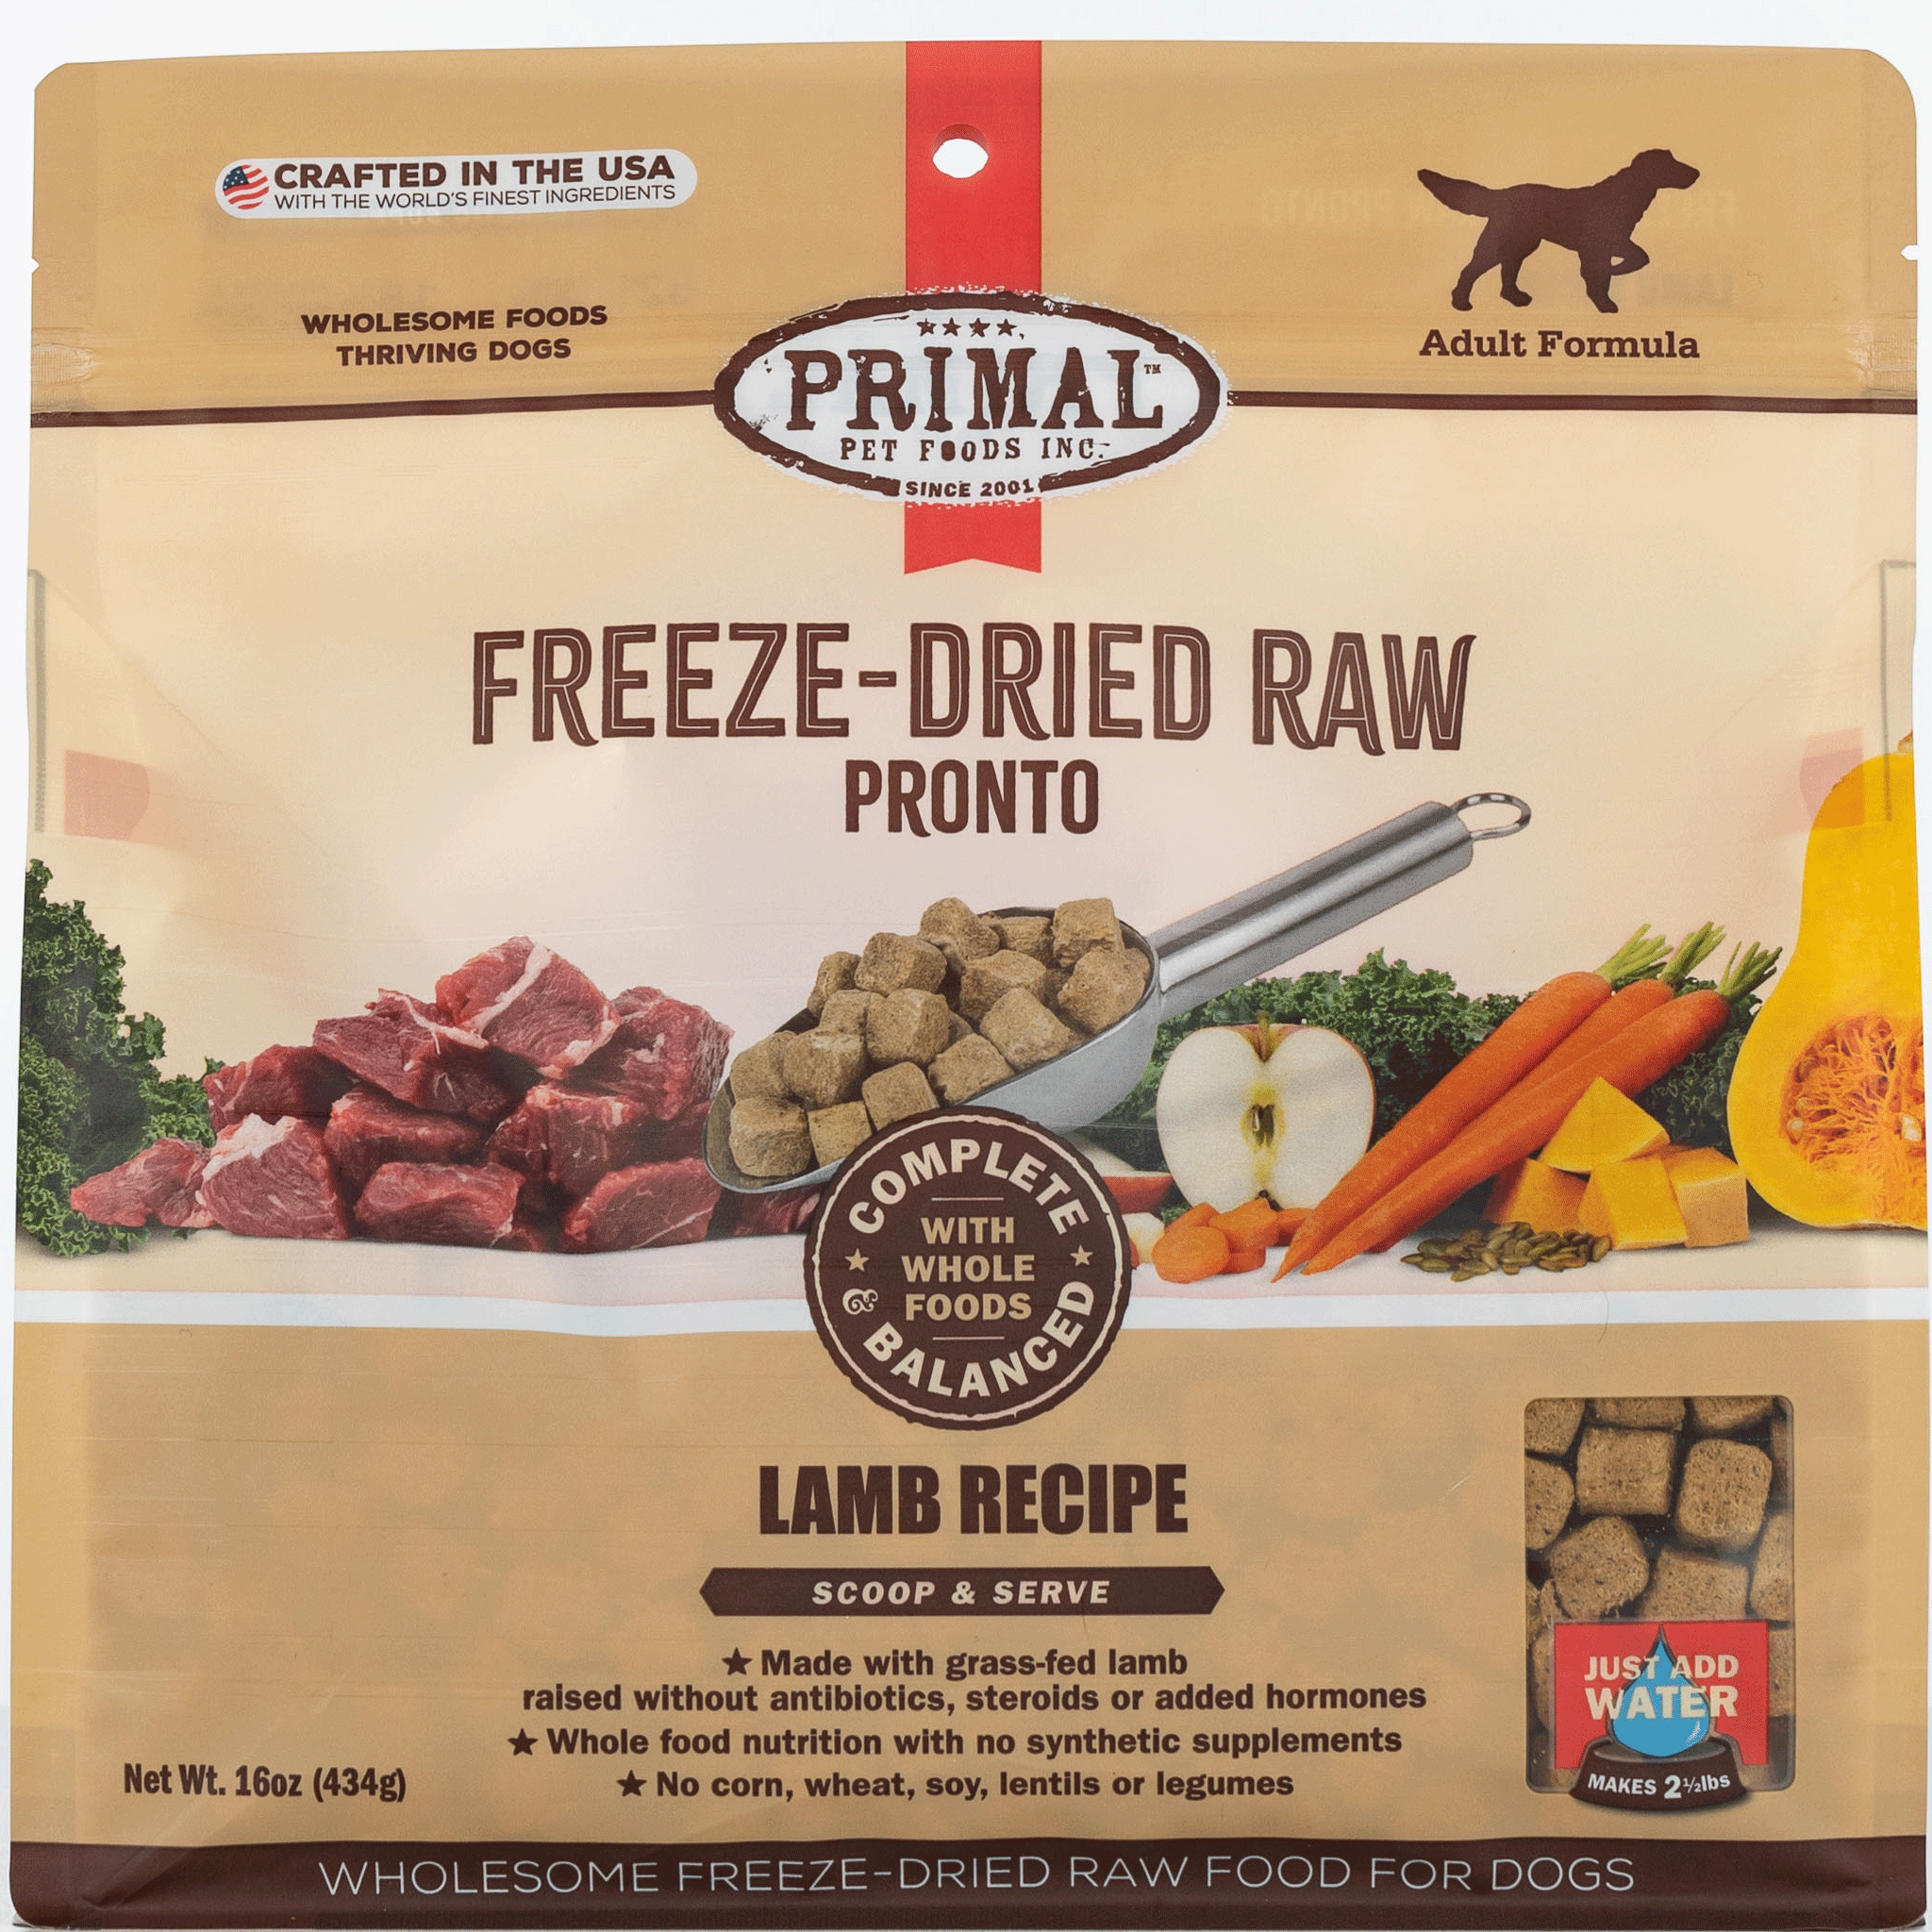 https://cdn.shopify.com/s/files/1/0995/5684/products/Primal_Freeze-Dried_Lamb_Pronto_Dog_Food_16oz_Front_Image.gif?v=1668813375